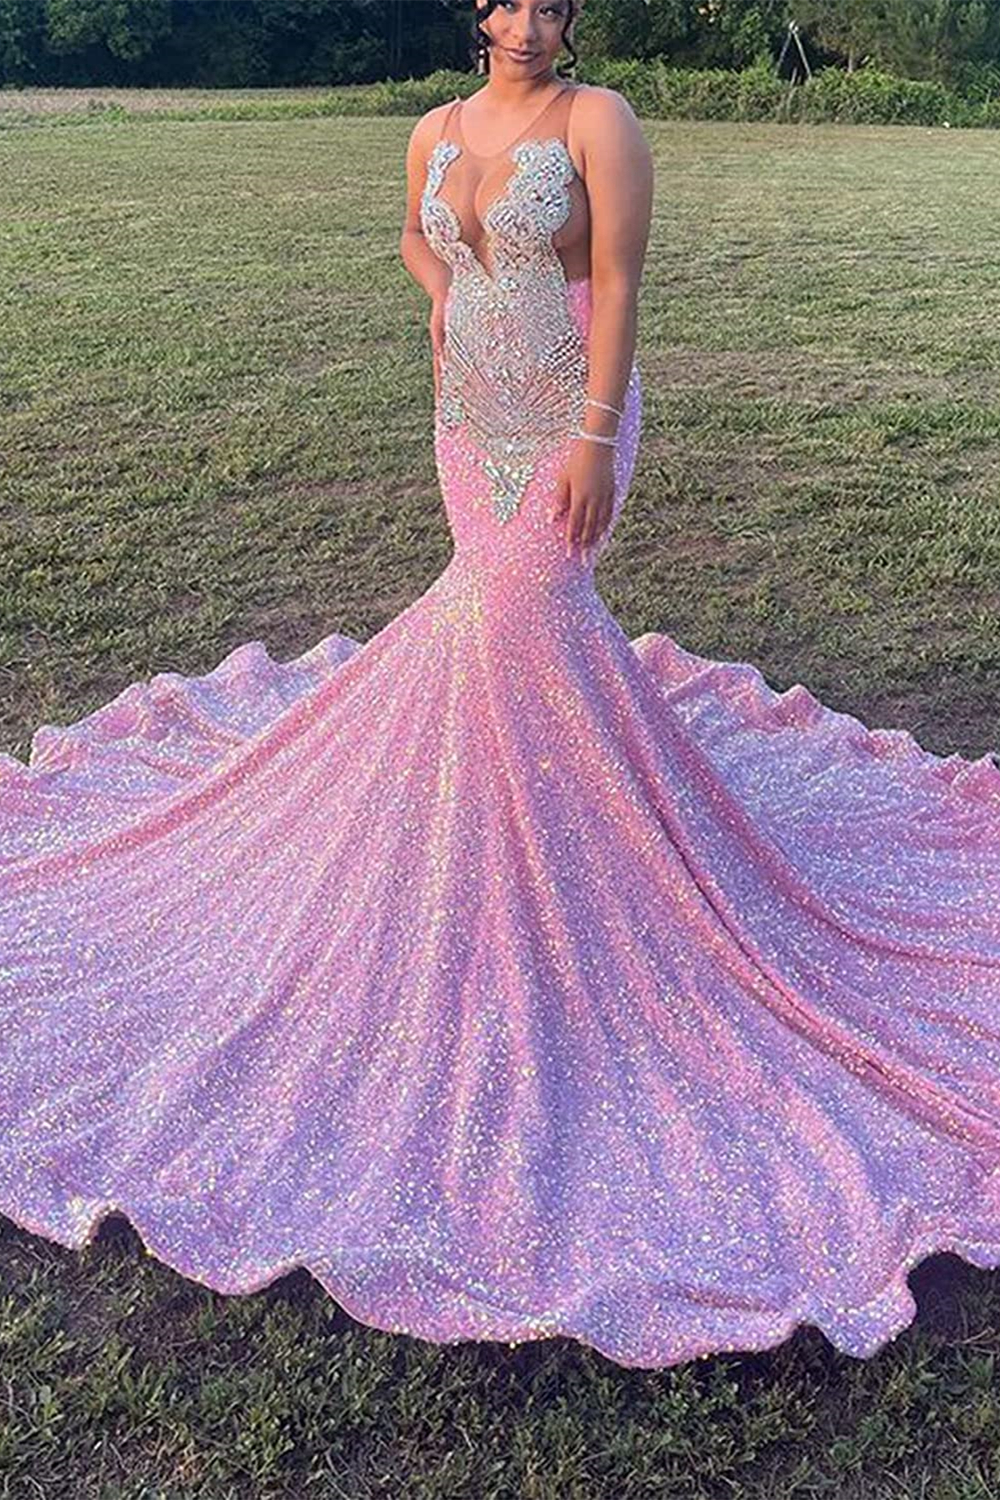 Bellasprom Pink Sequins Prom Dress Mermaid Sleeveless With Crystal Bellasprom